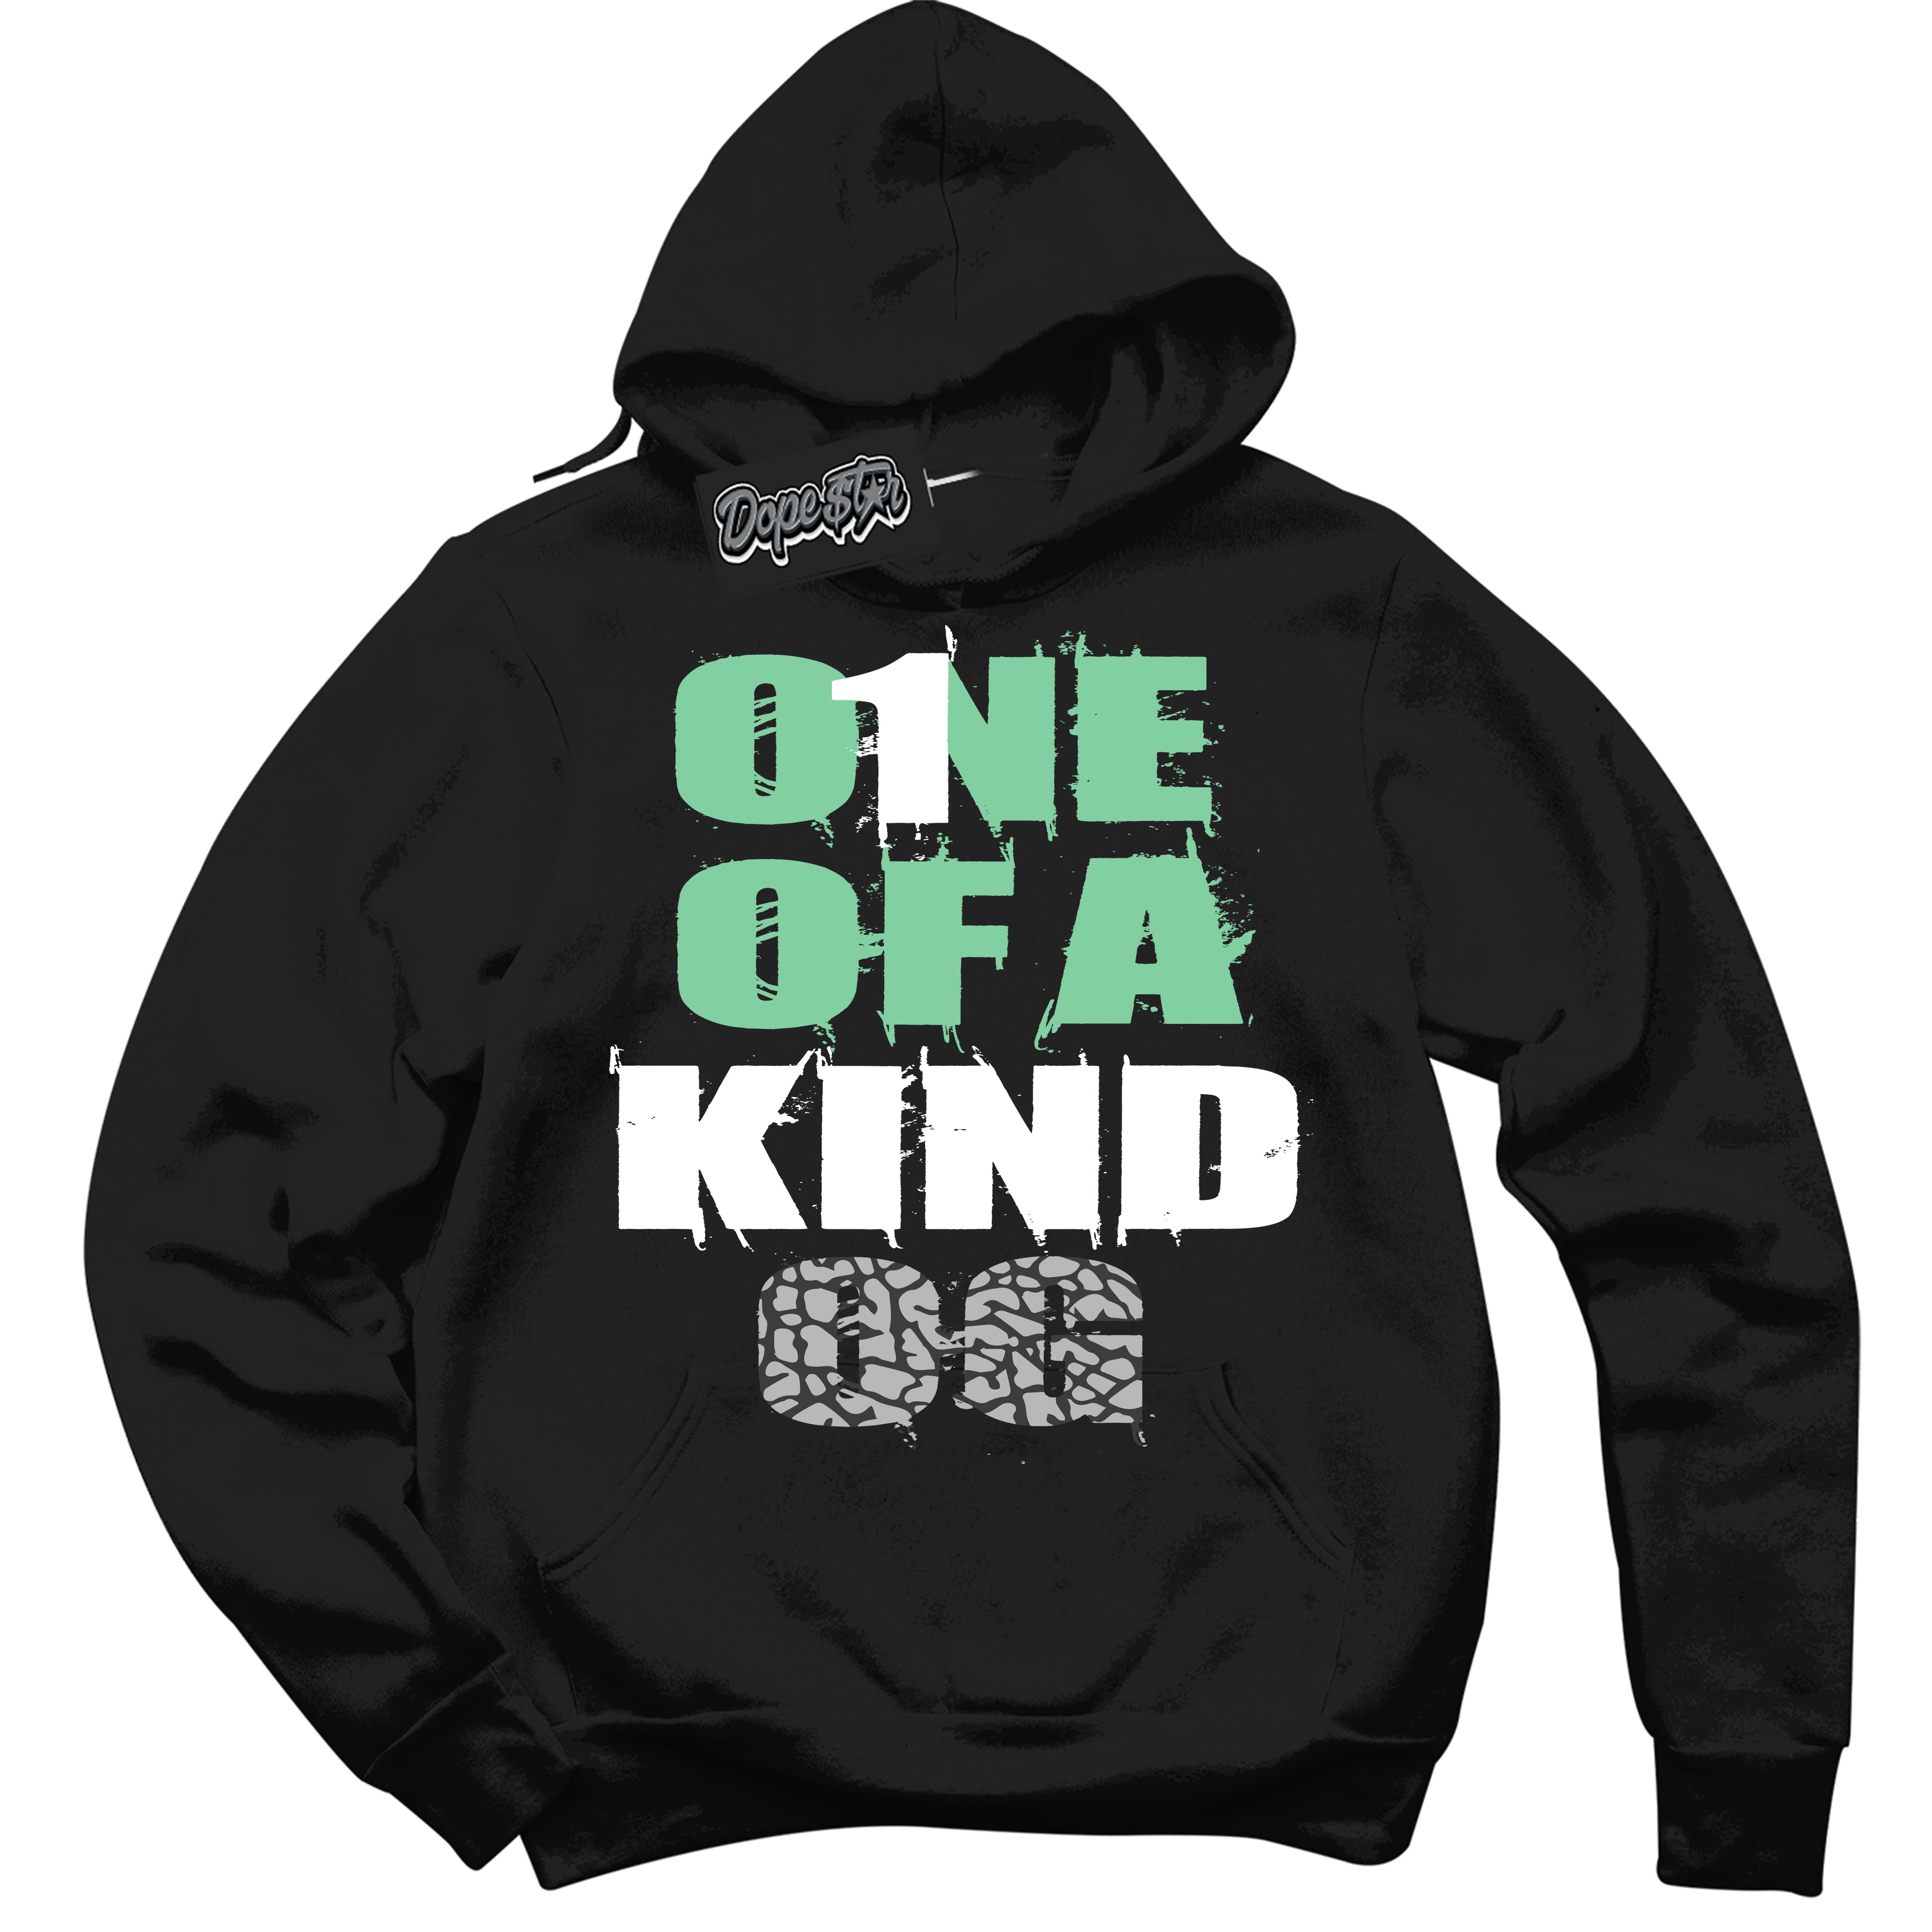 Cool Black Graphic DopeStar Hoodie with “ One Of A Kind “ print, that perfectly matches Green Glow 3S sneakers